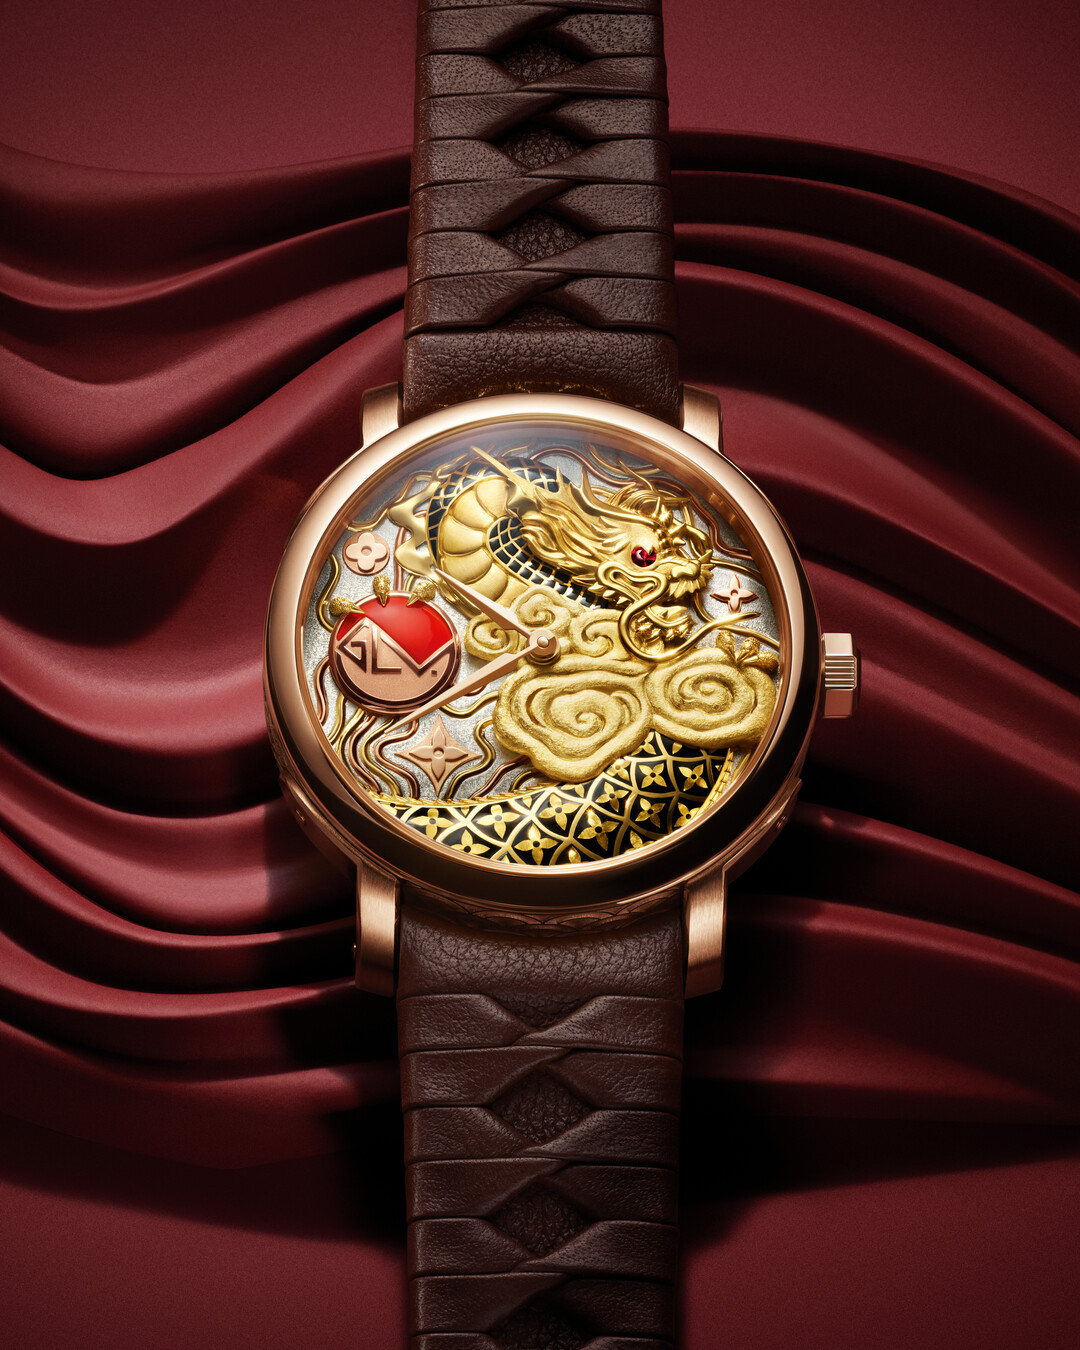 A detailed wristwatch with an artistic face featuring intricate designs, set against a wavy backdrop